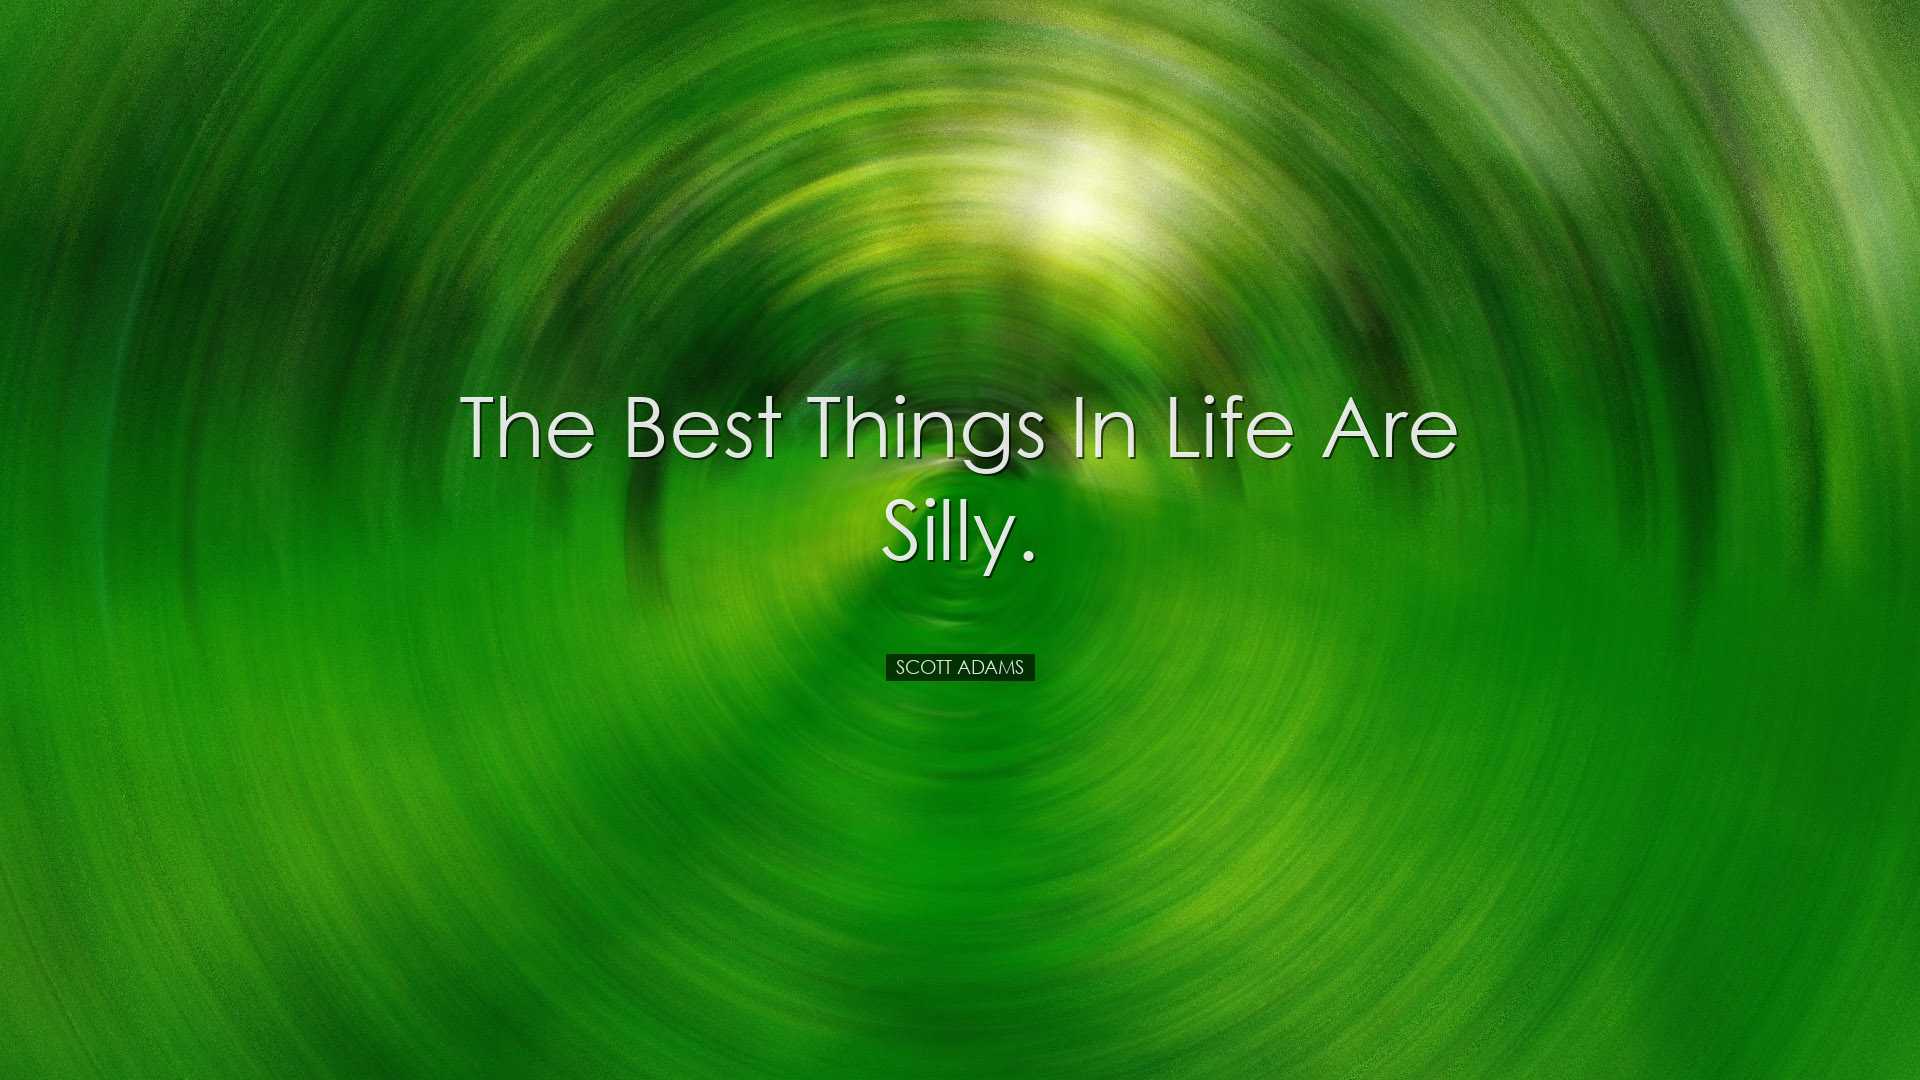 The best things in life are silly. - Scott Adams